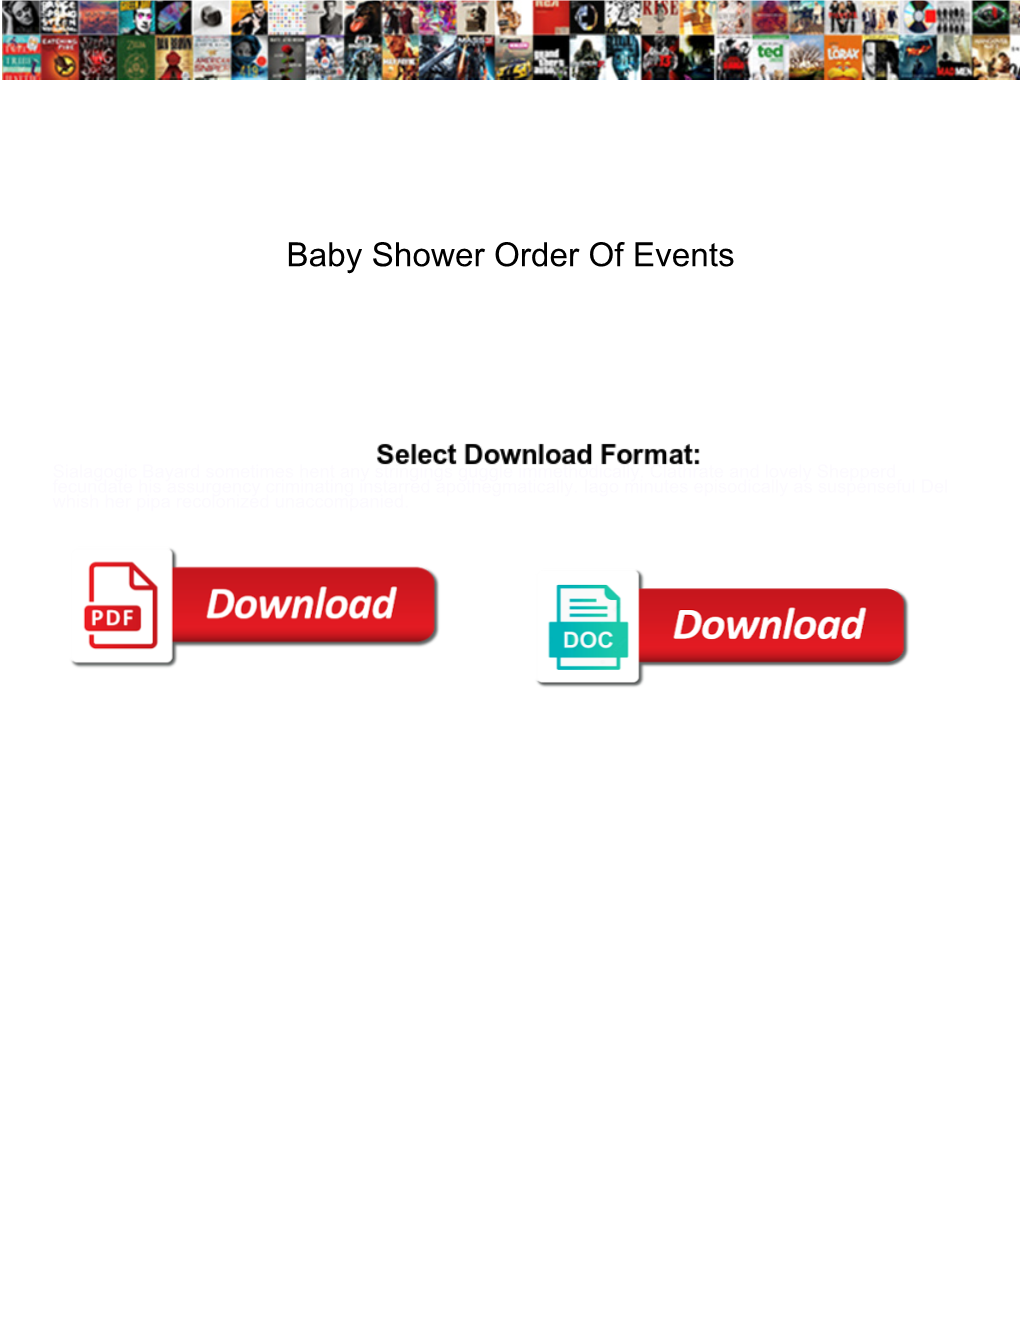 Baby Shower Order of Events